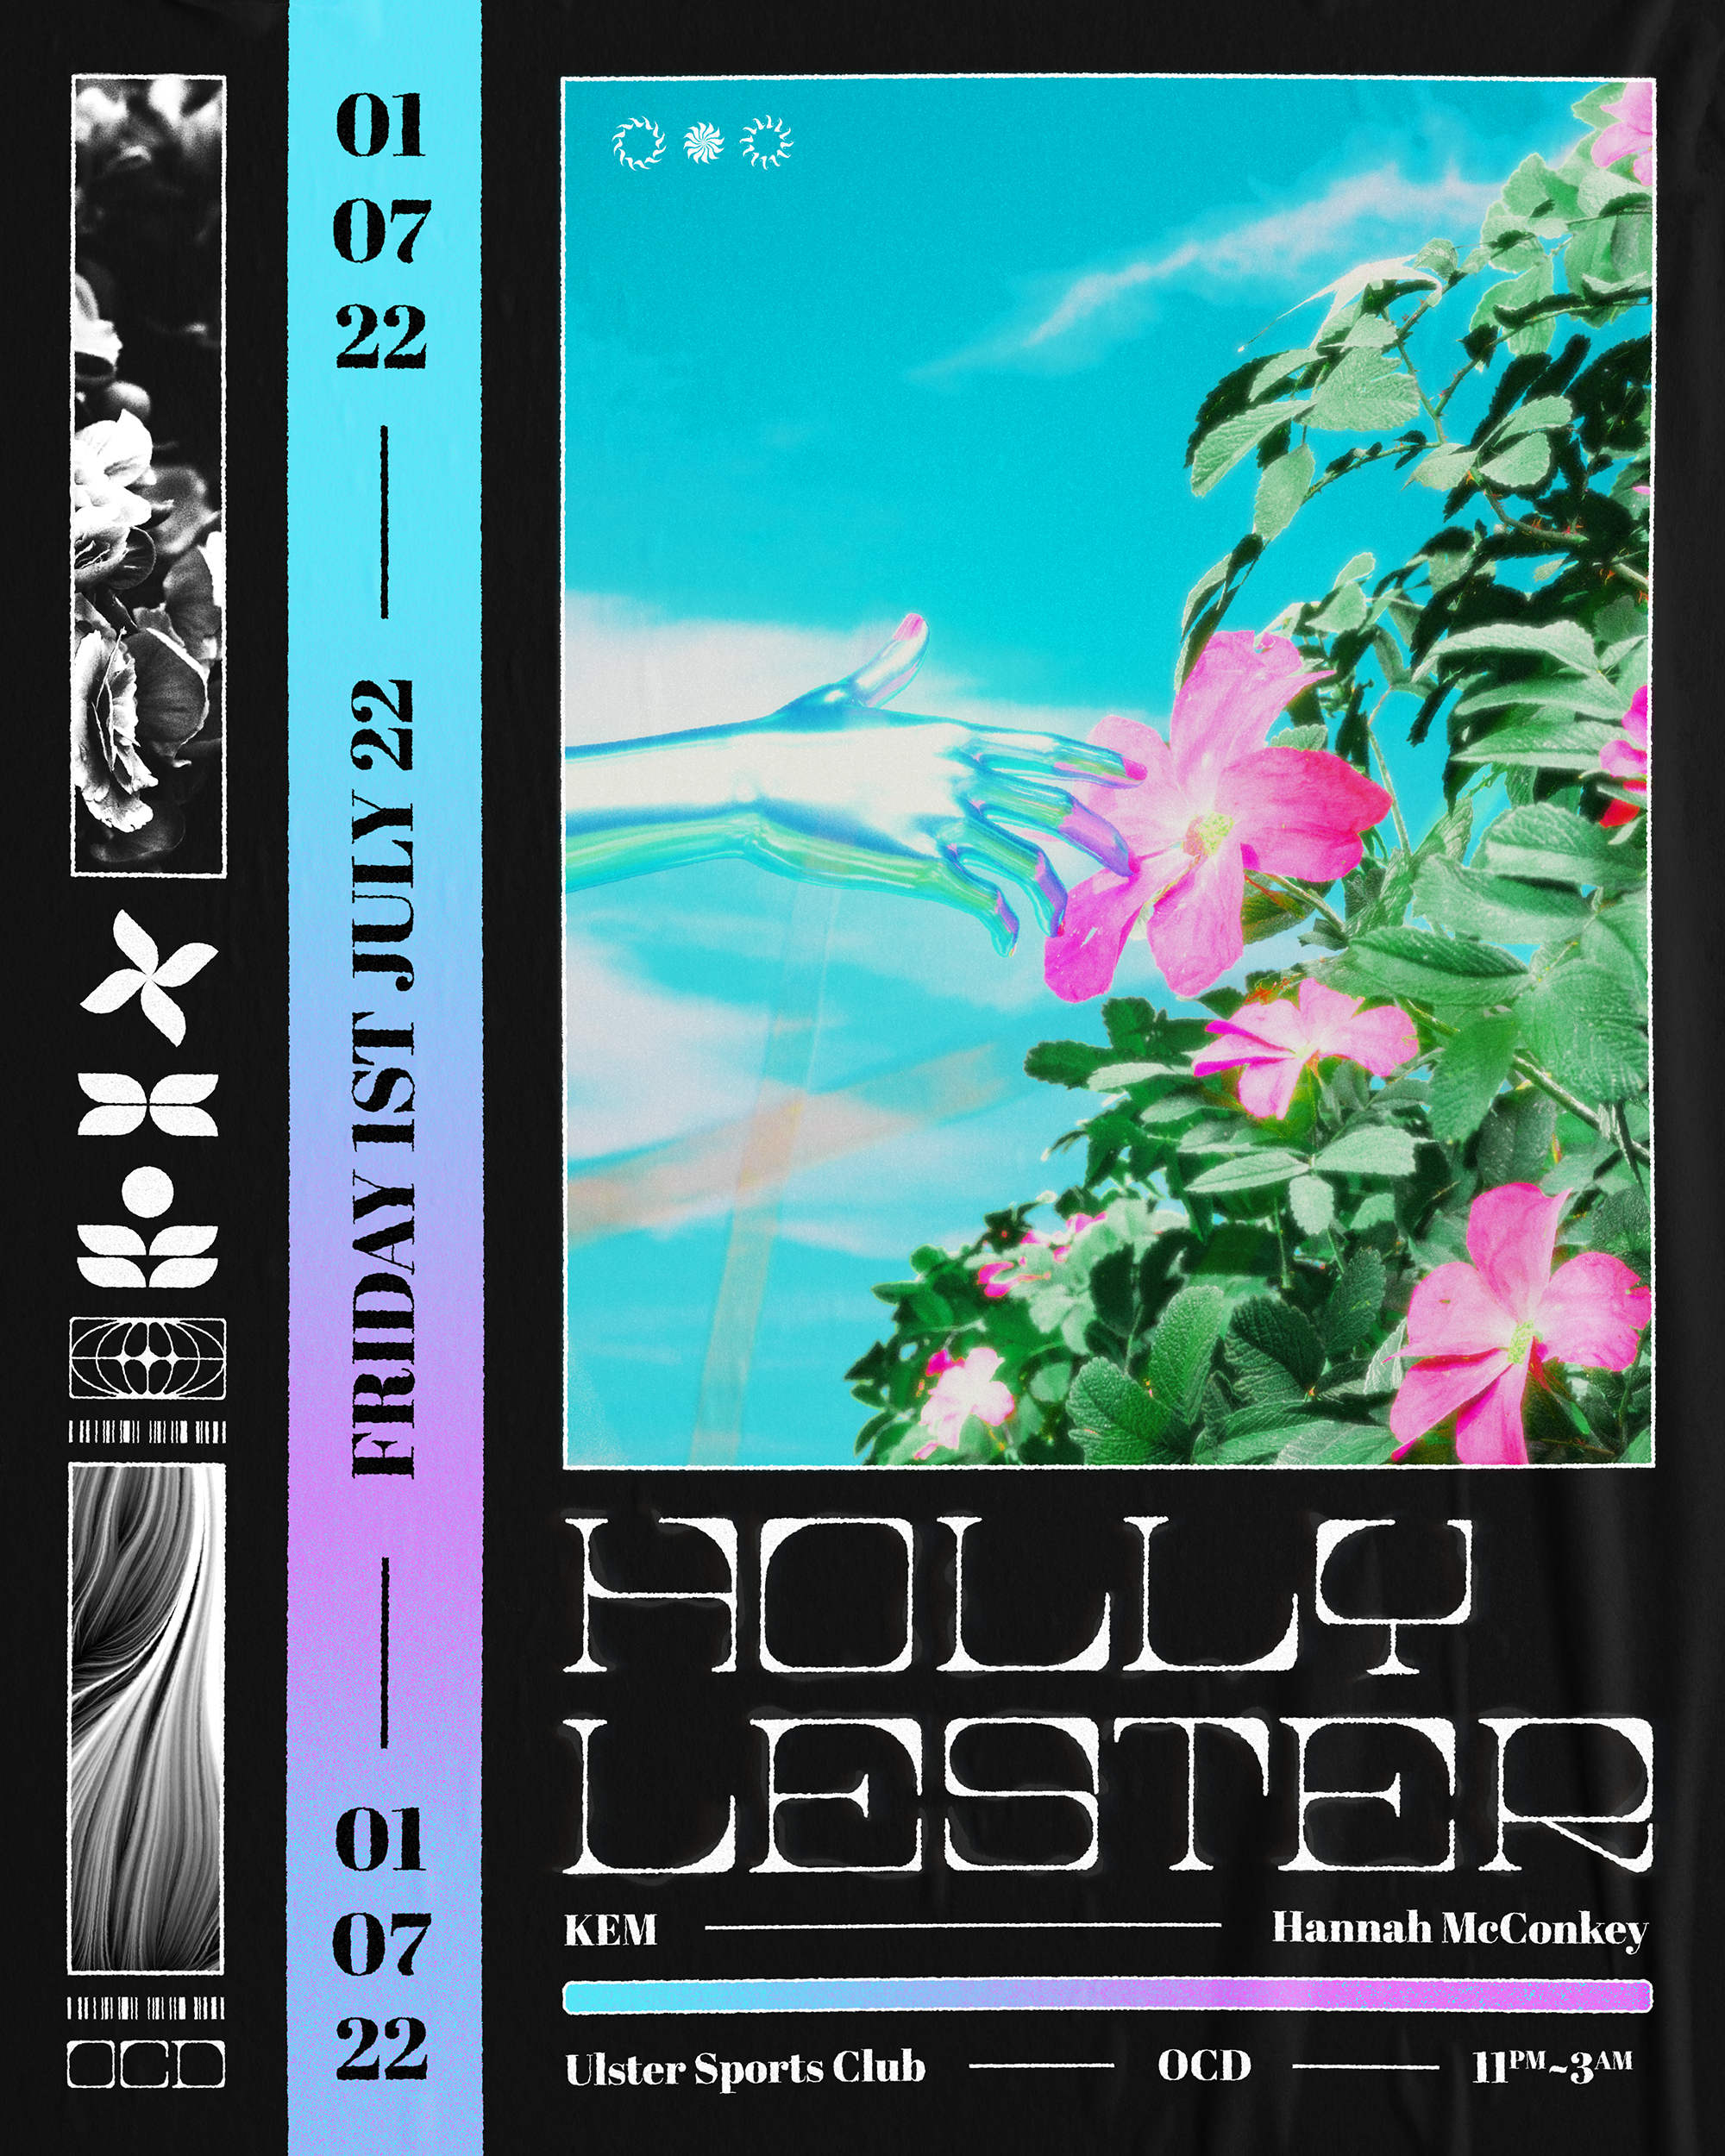 OCD presents Holly Lester - Flyer front